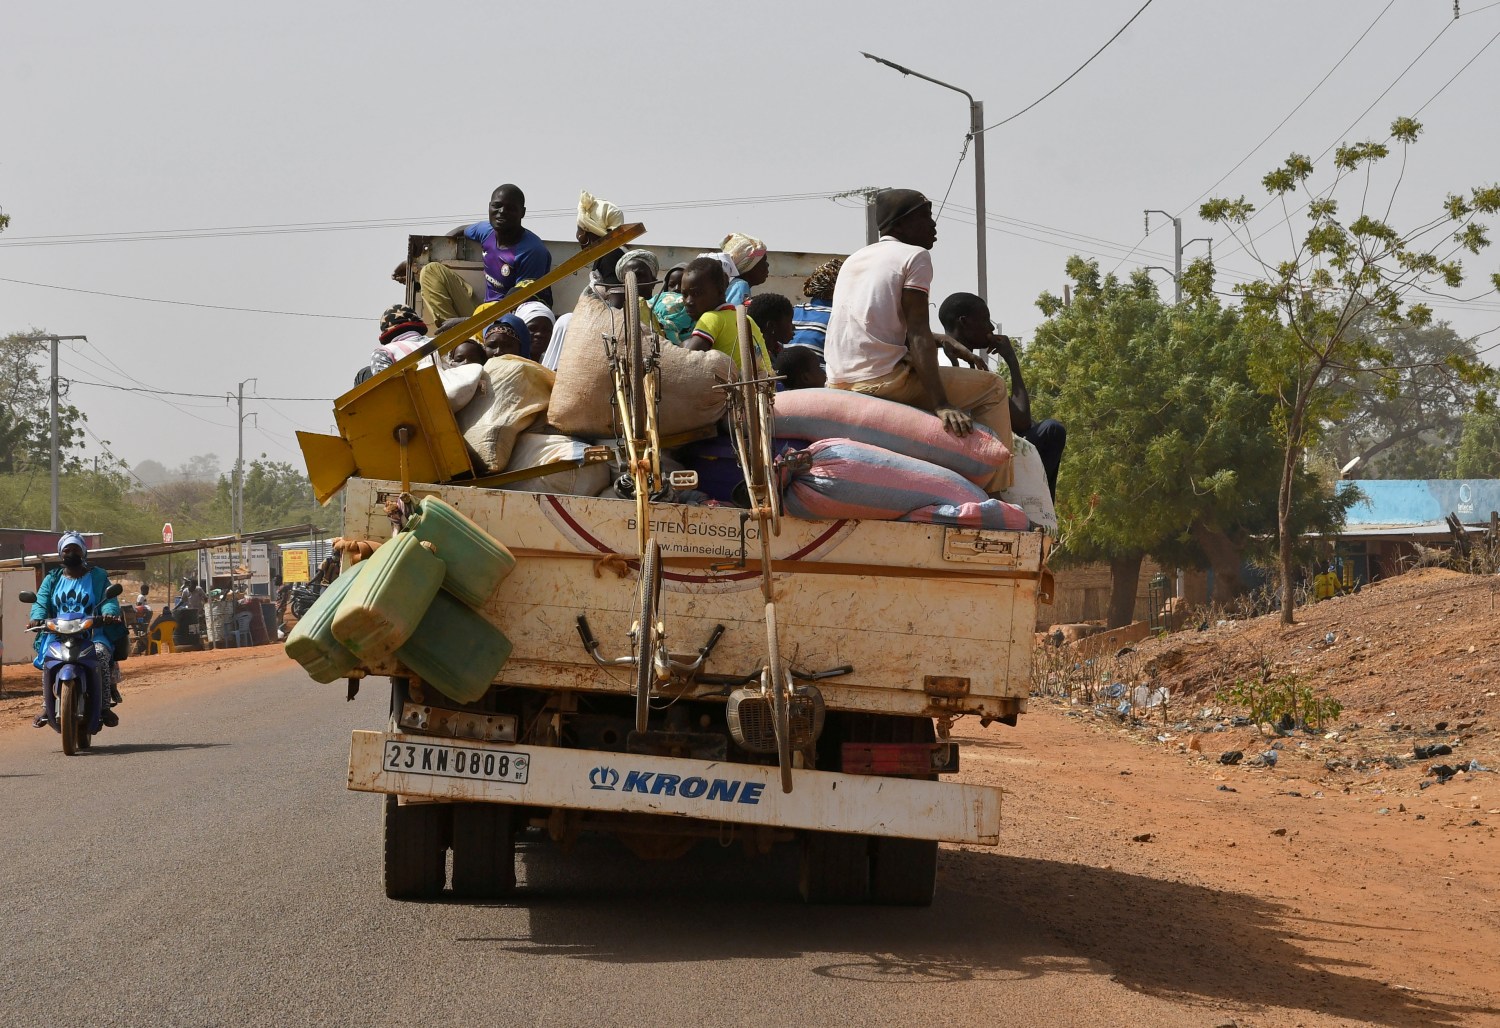 FILE PHOTO: Displaced people, who fled from attacks by armed militants in the town of Roffenega arrive on a truck in the city of Kaya near Pissila, Burkina Faso January 24, 2020. Picture taken January 24, 2020. REUTERS/Anne Mimault/File Photo